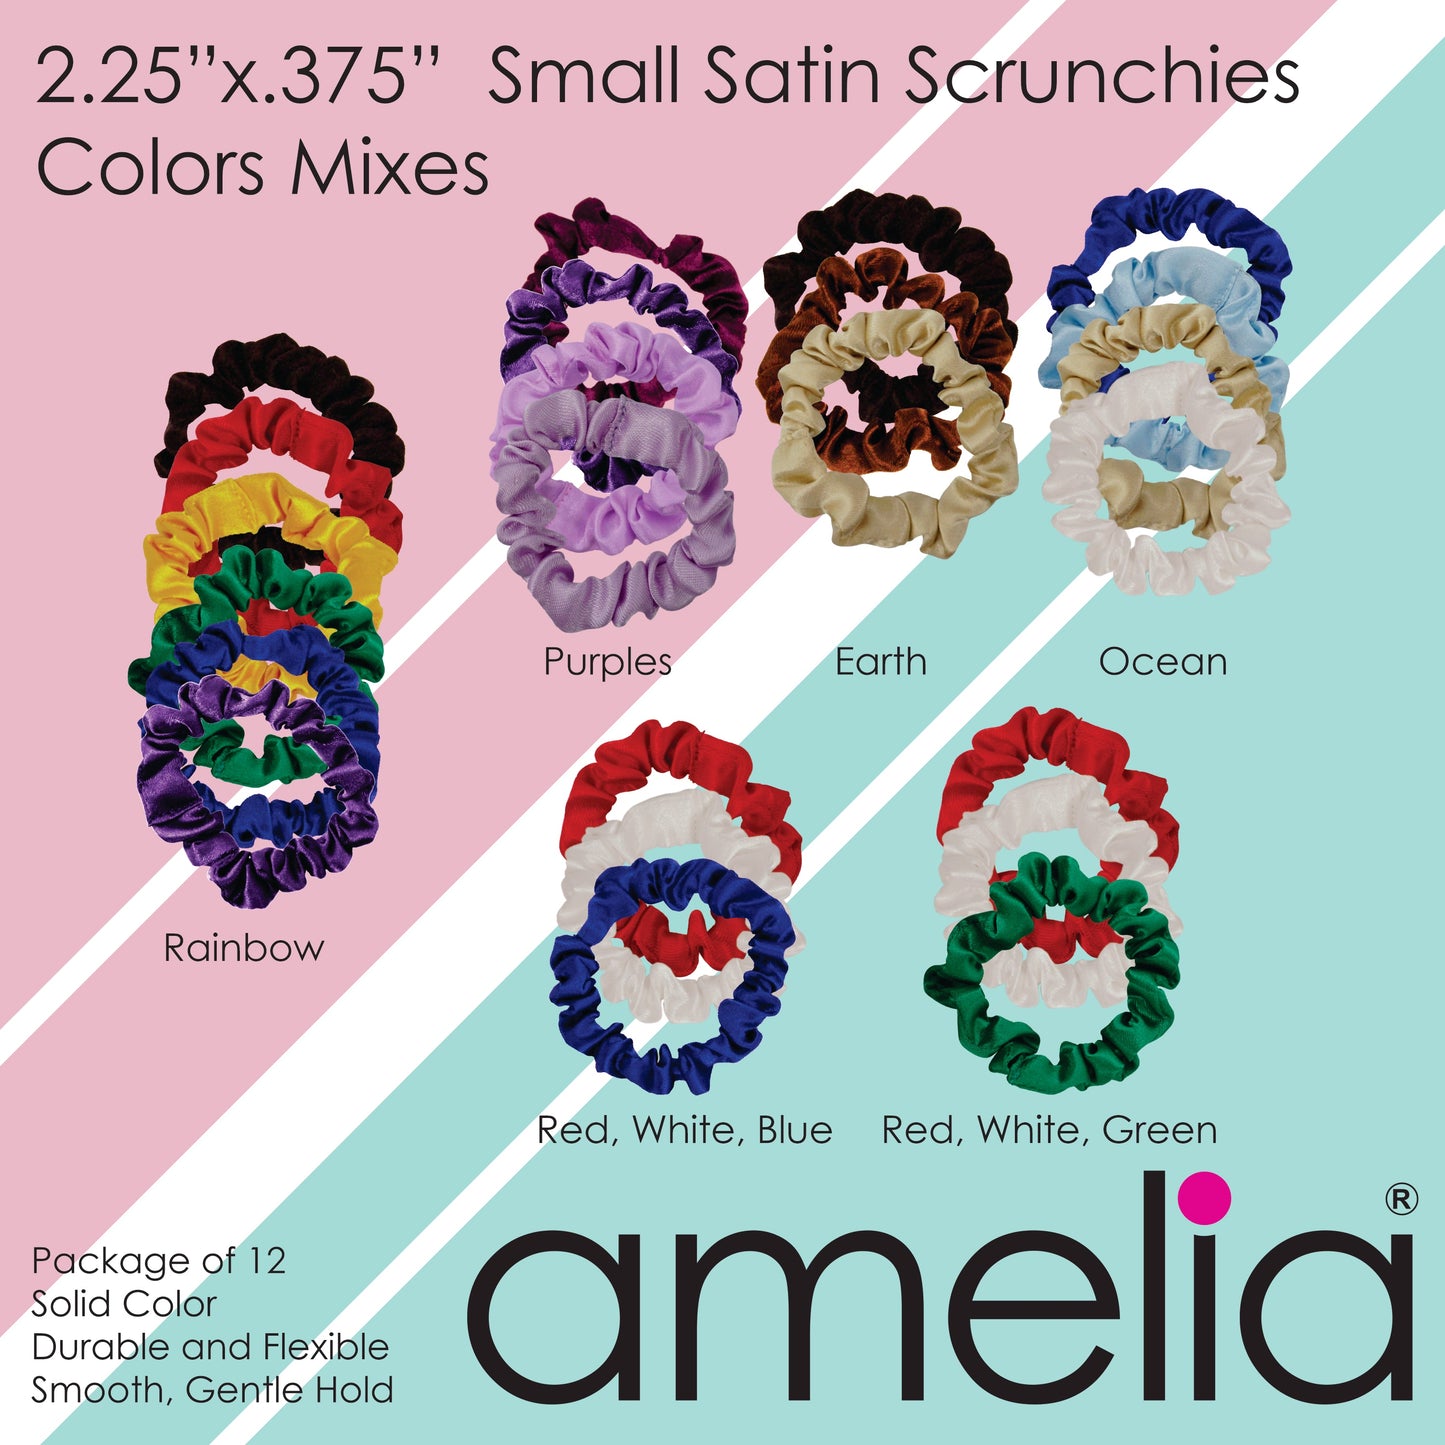 Amelia Beauty, White Satin Scrunchies, 2.25in Diameter, Gentle on Hair, Strong Hold, No Snag, No Dents or Creases. 12 Pack - 12 Retail Packs